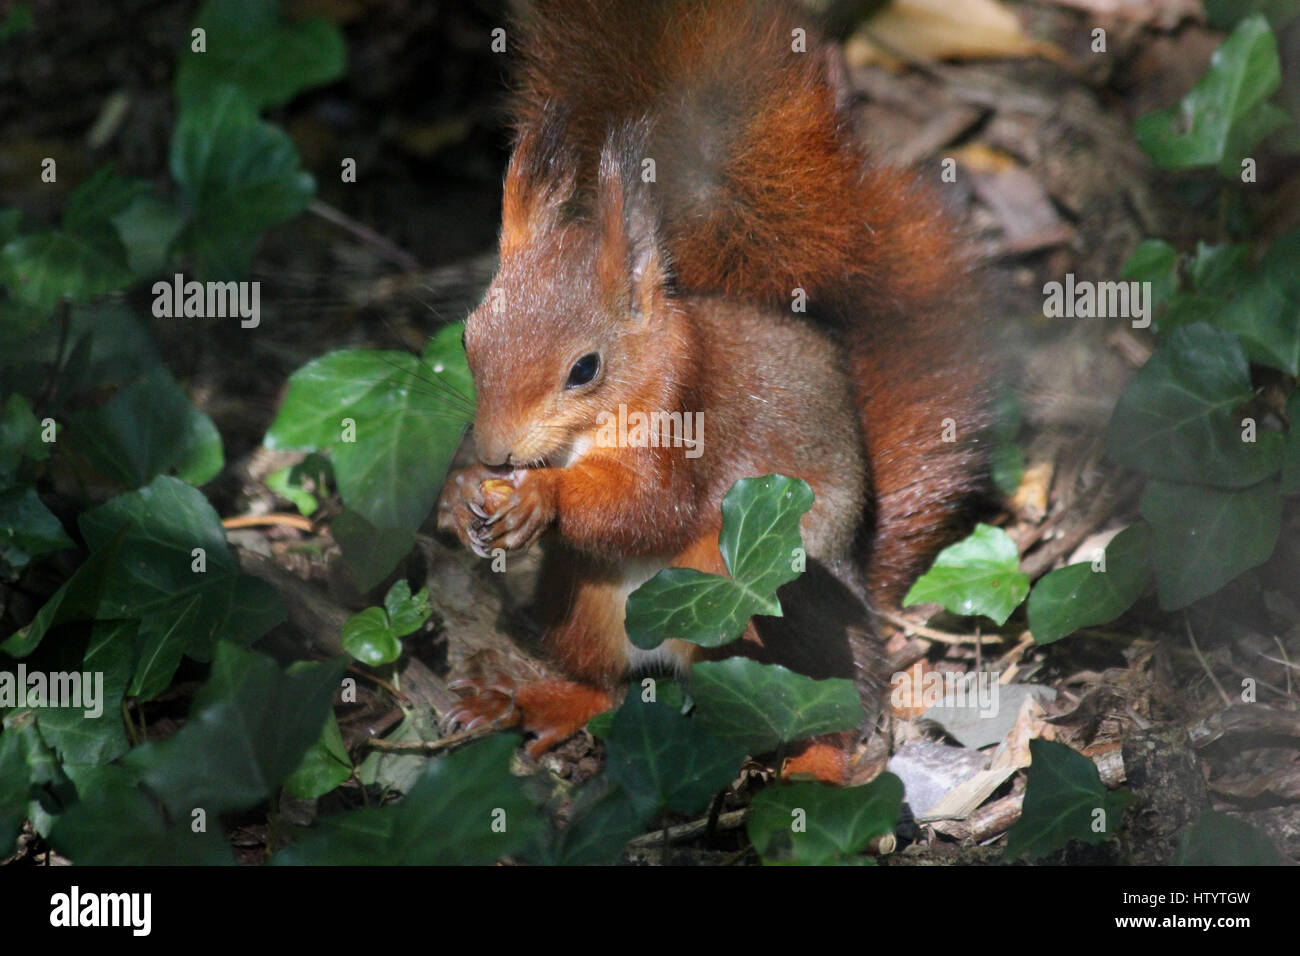 Red squirrel (Sciurus vulgaris) eating an acorn in dappled shade sitting among common ivy (Hedera helix) on the ground Stock Photo